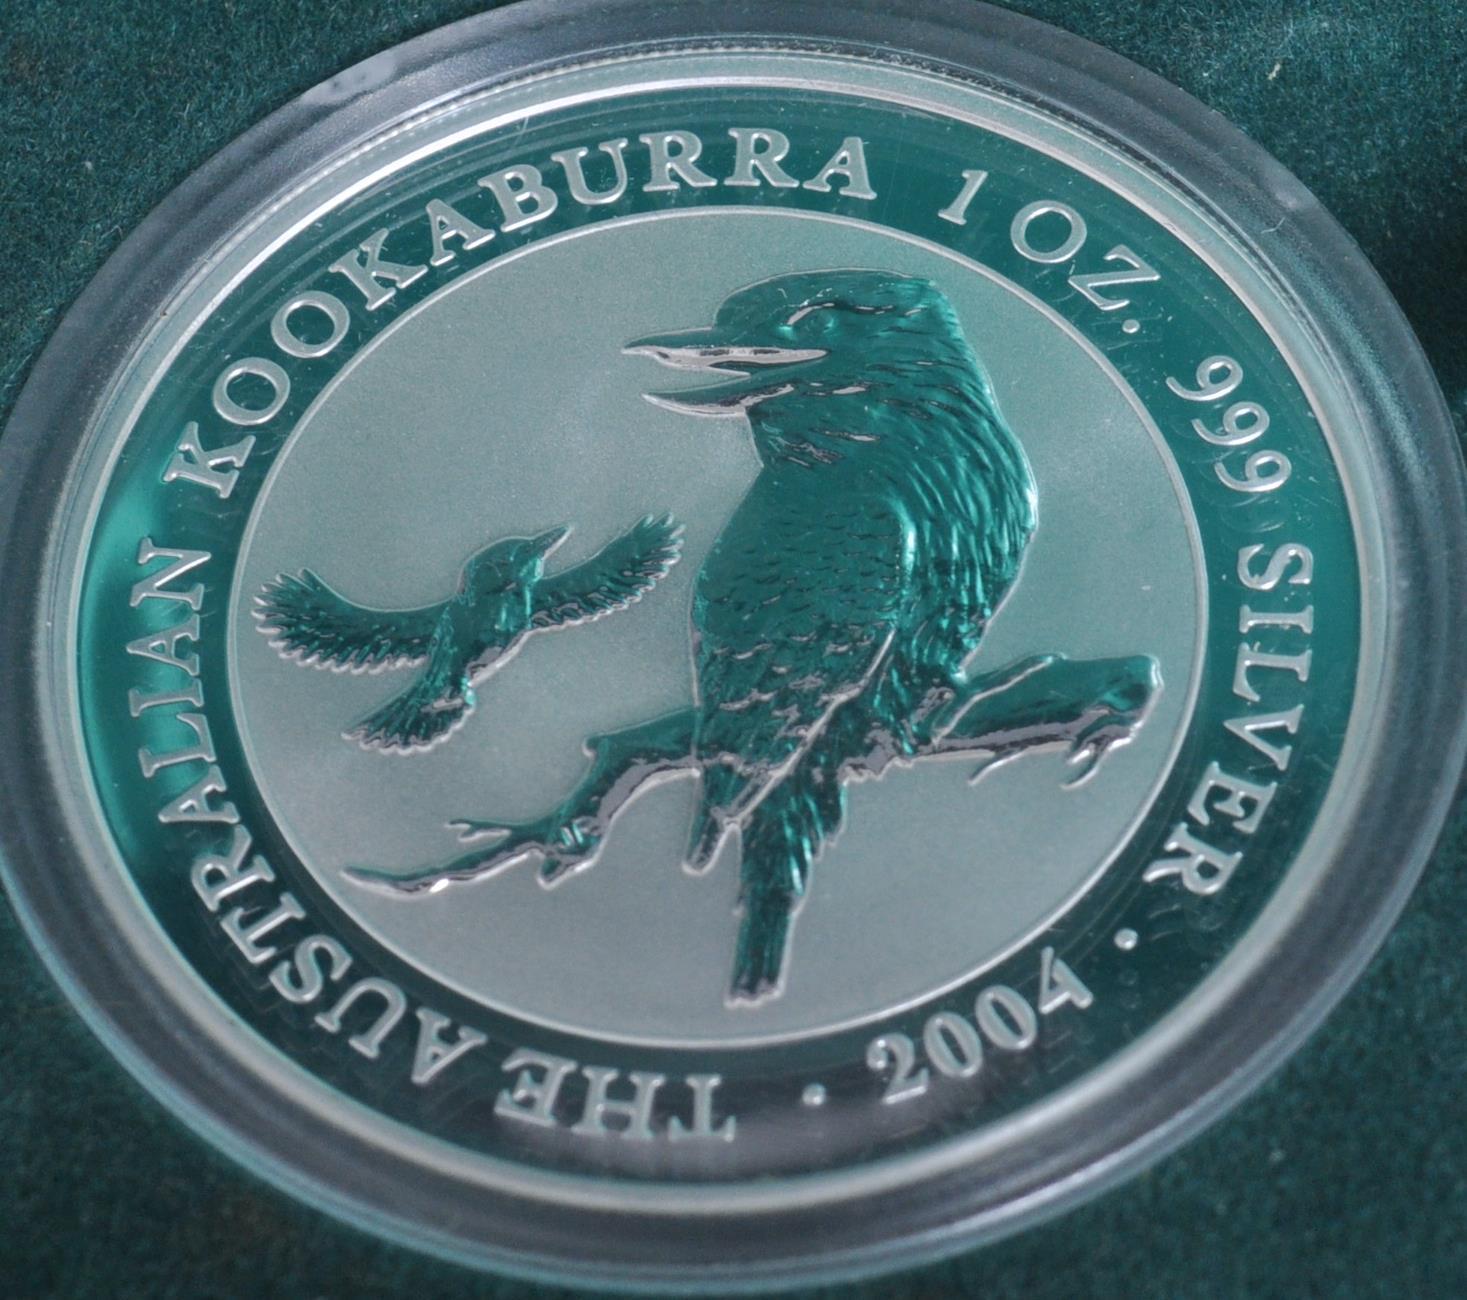 COLLECTION OF THREE KOOKABURRA .999 SILVER COINS - Image 2 of 4